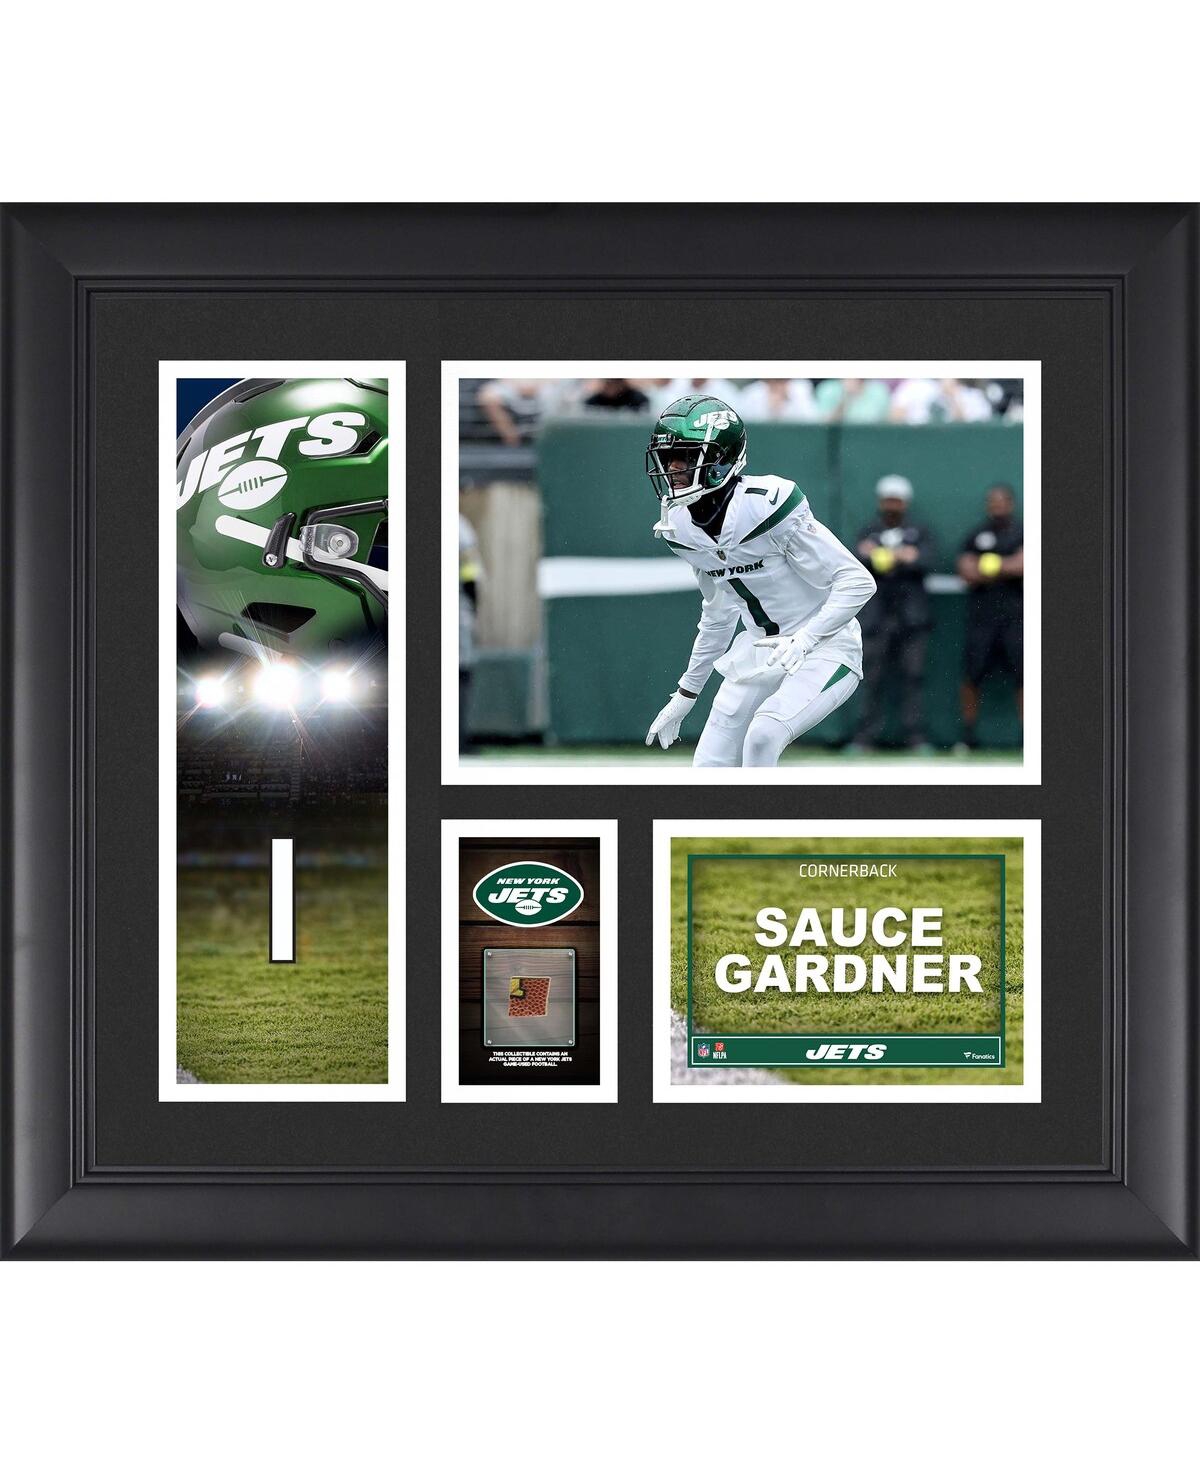 Fanatics Authentic Ahmad Sauce Gardner New York Jets Framed 15" X 17" Player Collage With A Piece Of Game-used Ball In Multi